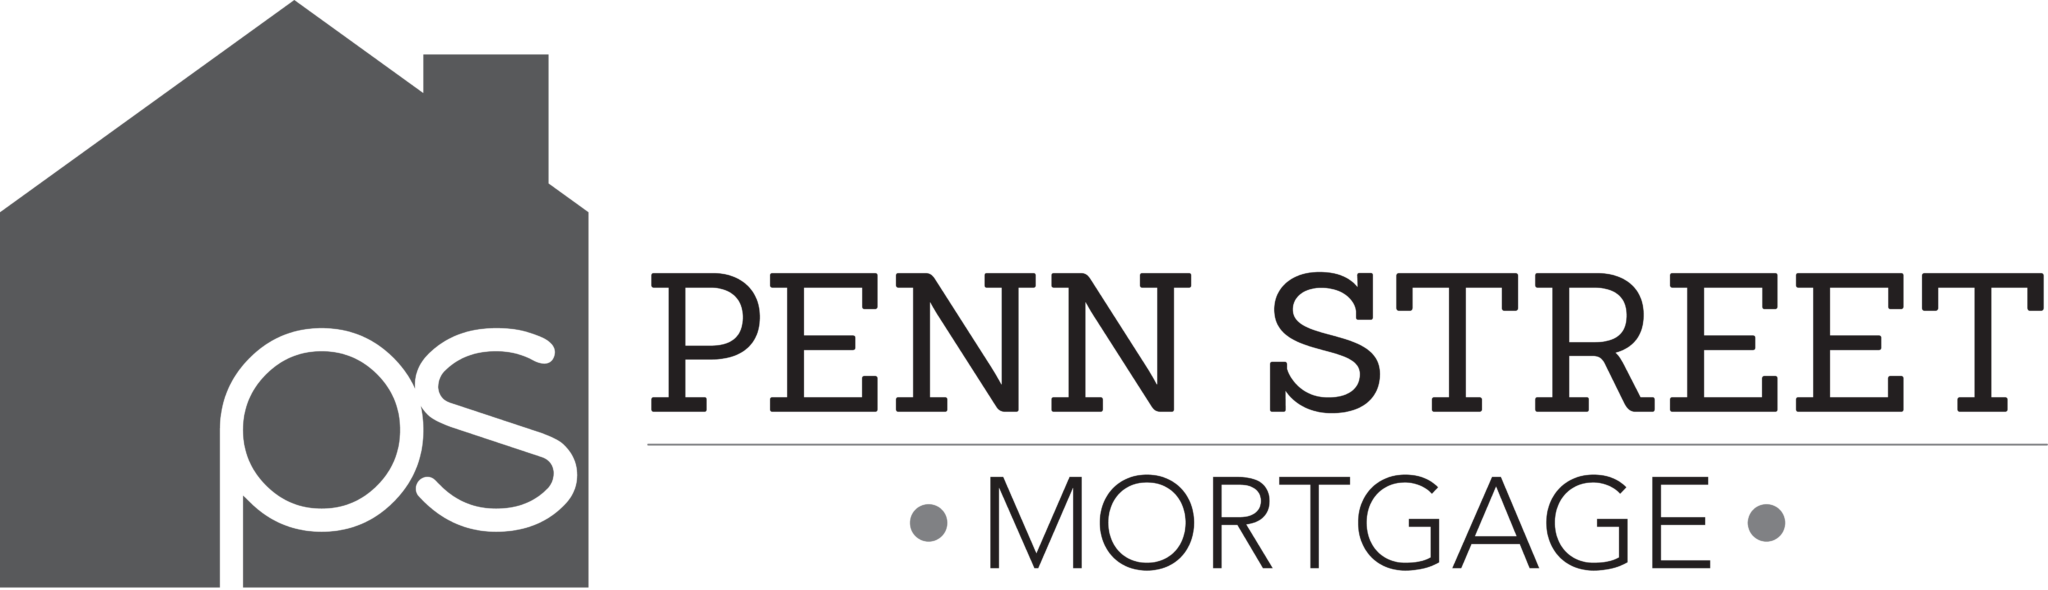 Philadelphia mortgage company | helping you navigate the mortgage process to make your dream home affordable